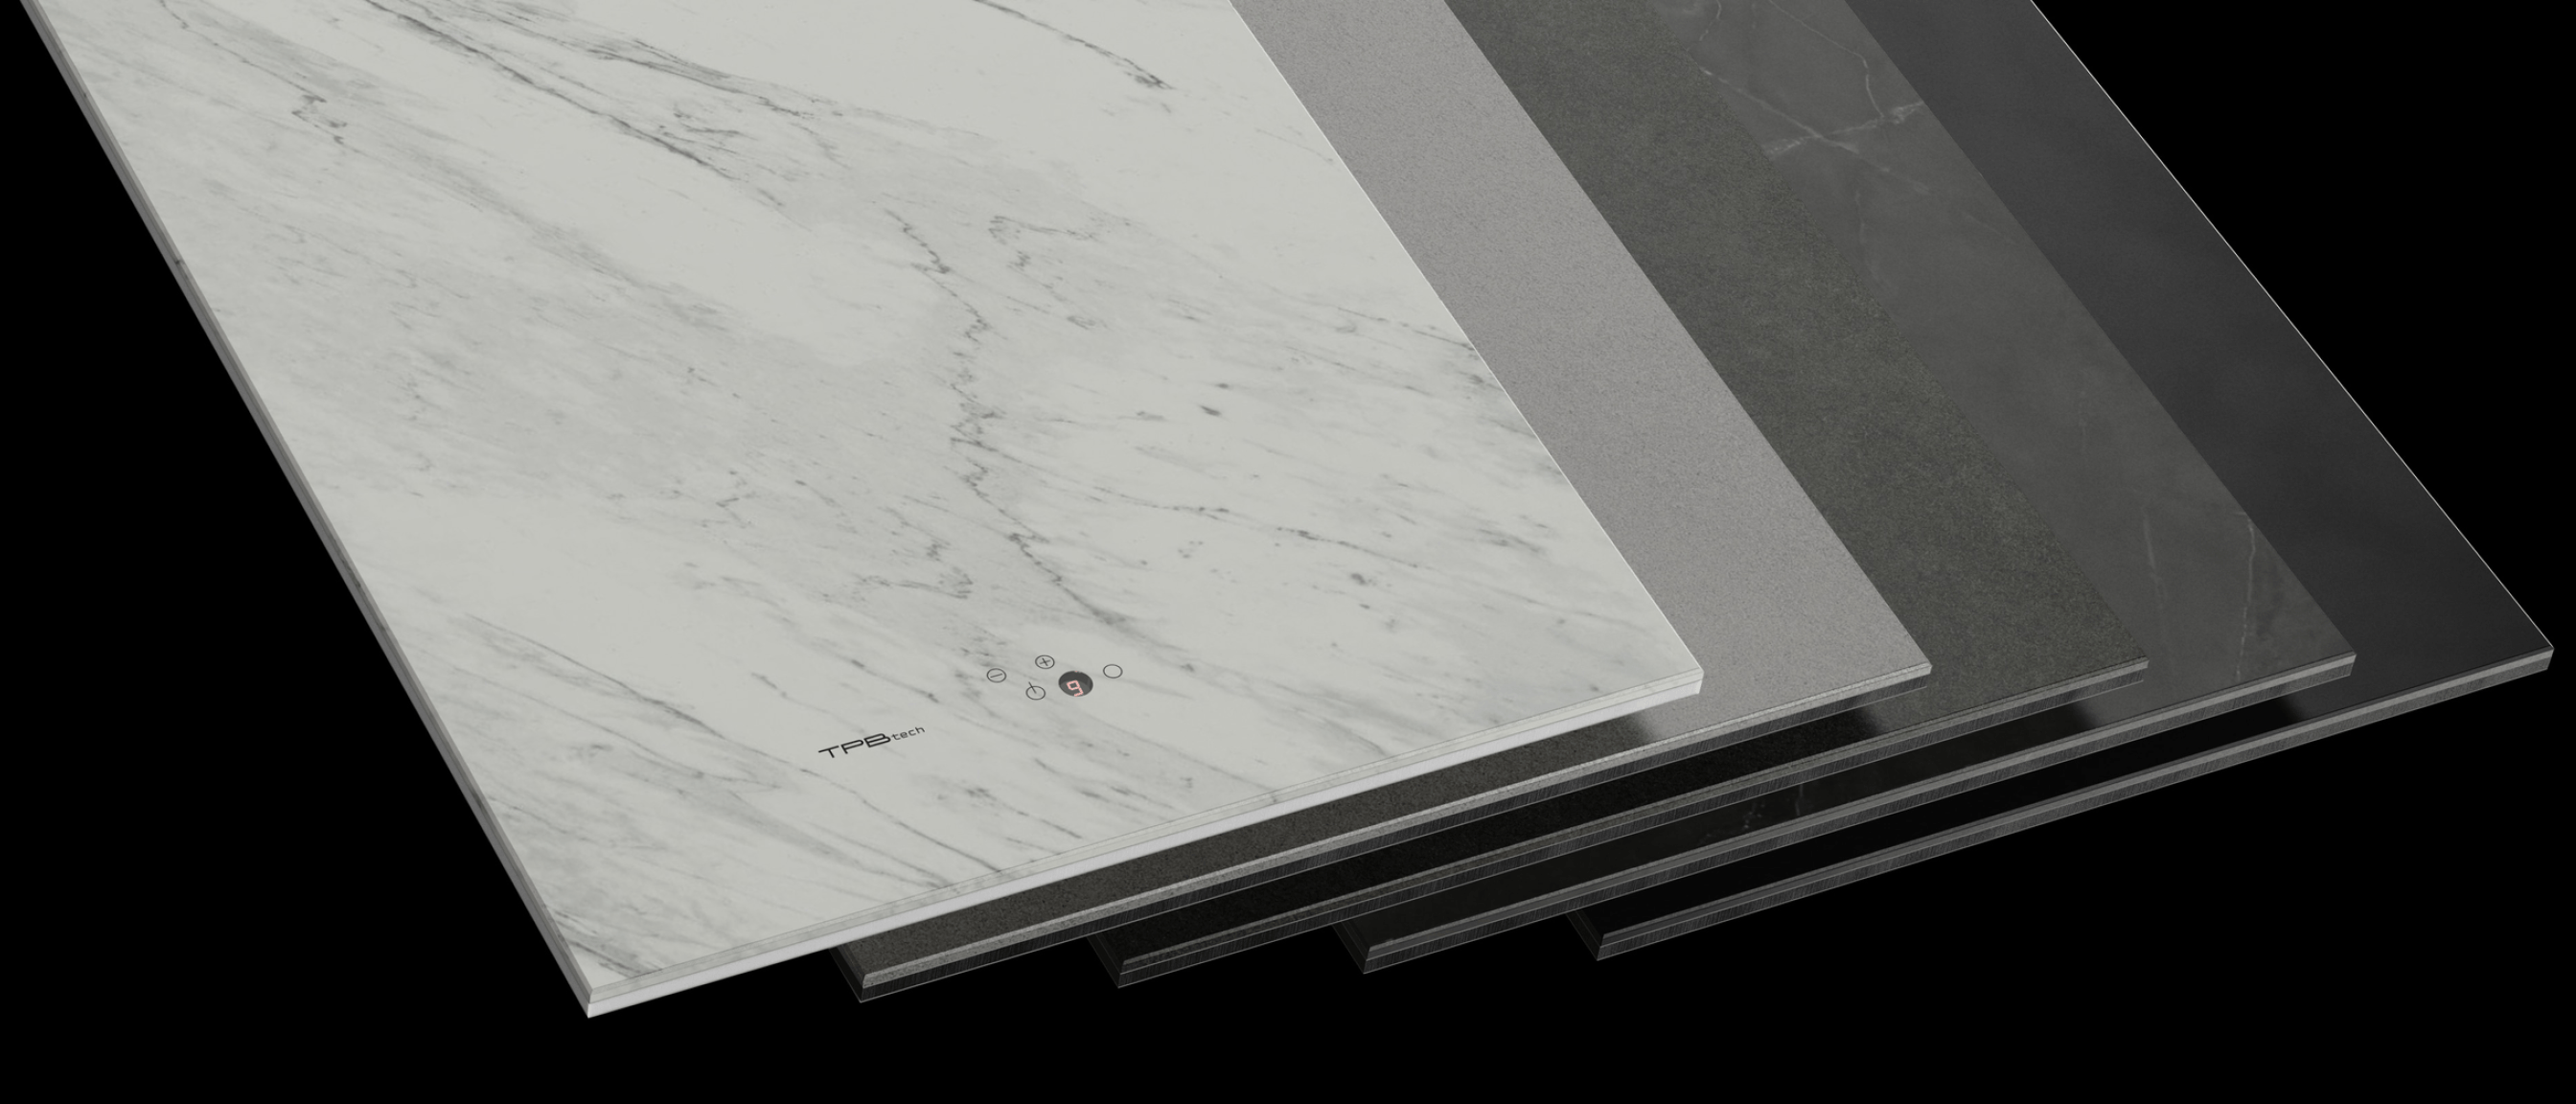 NeoLiTH image